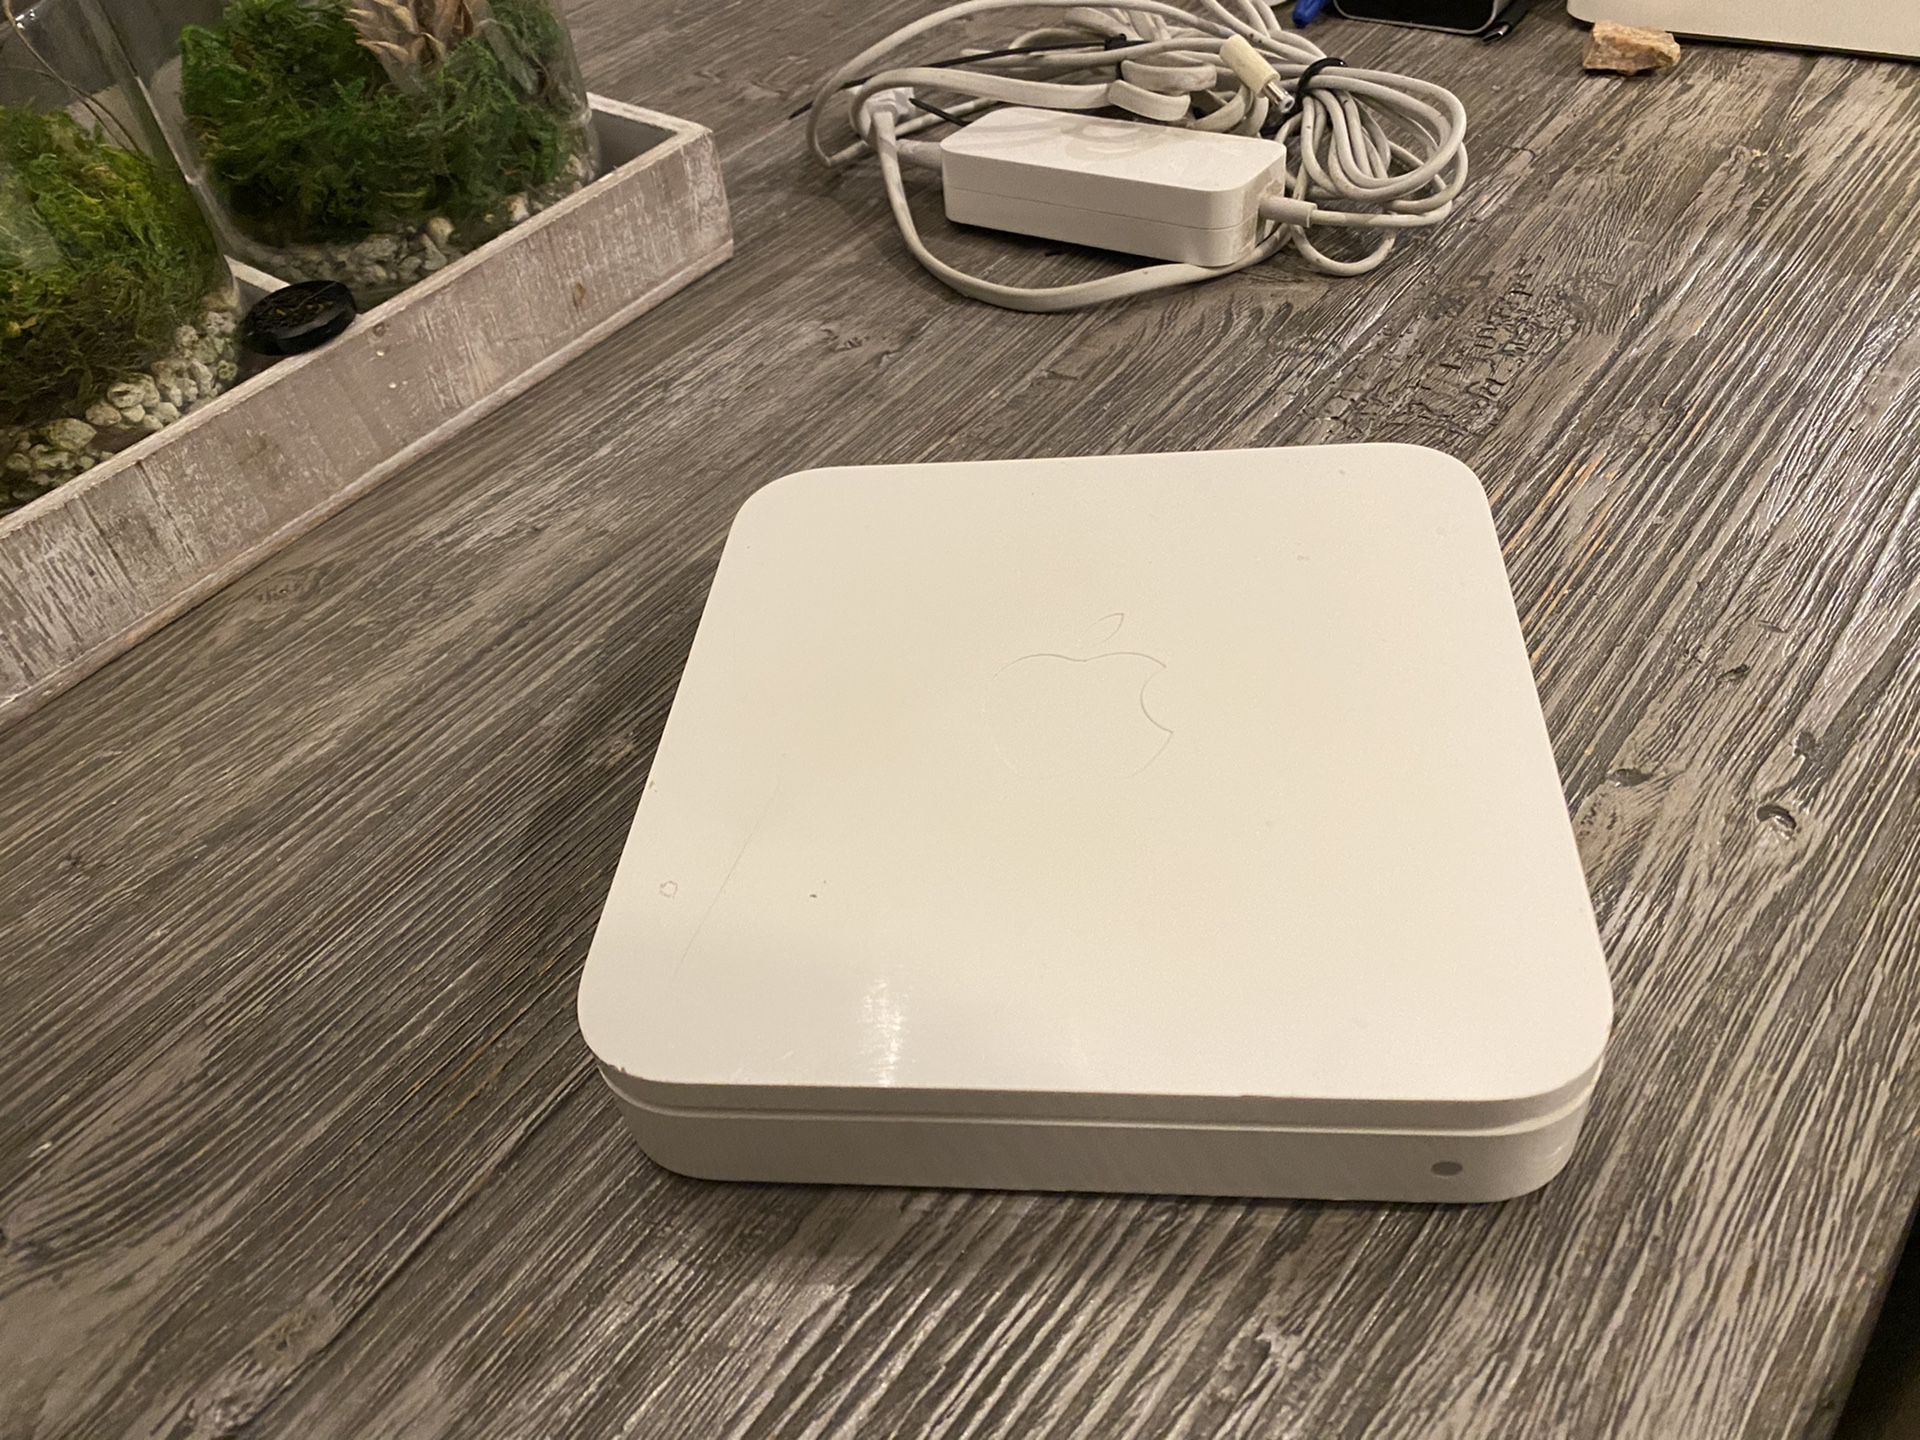 Apple AirPort Extreme A1143